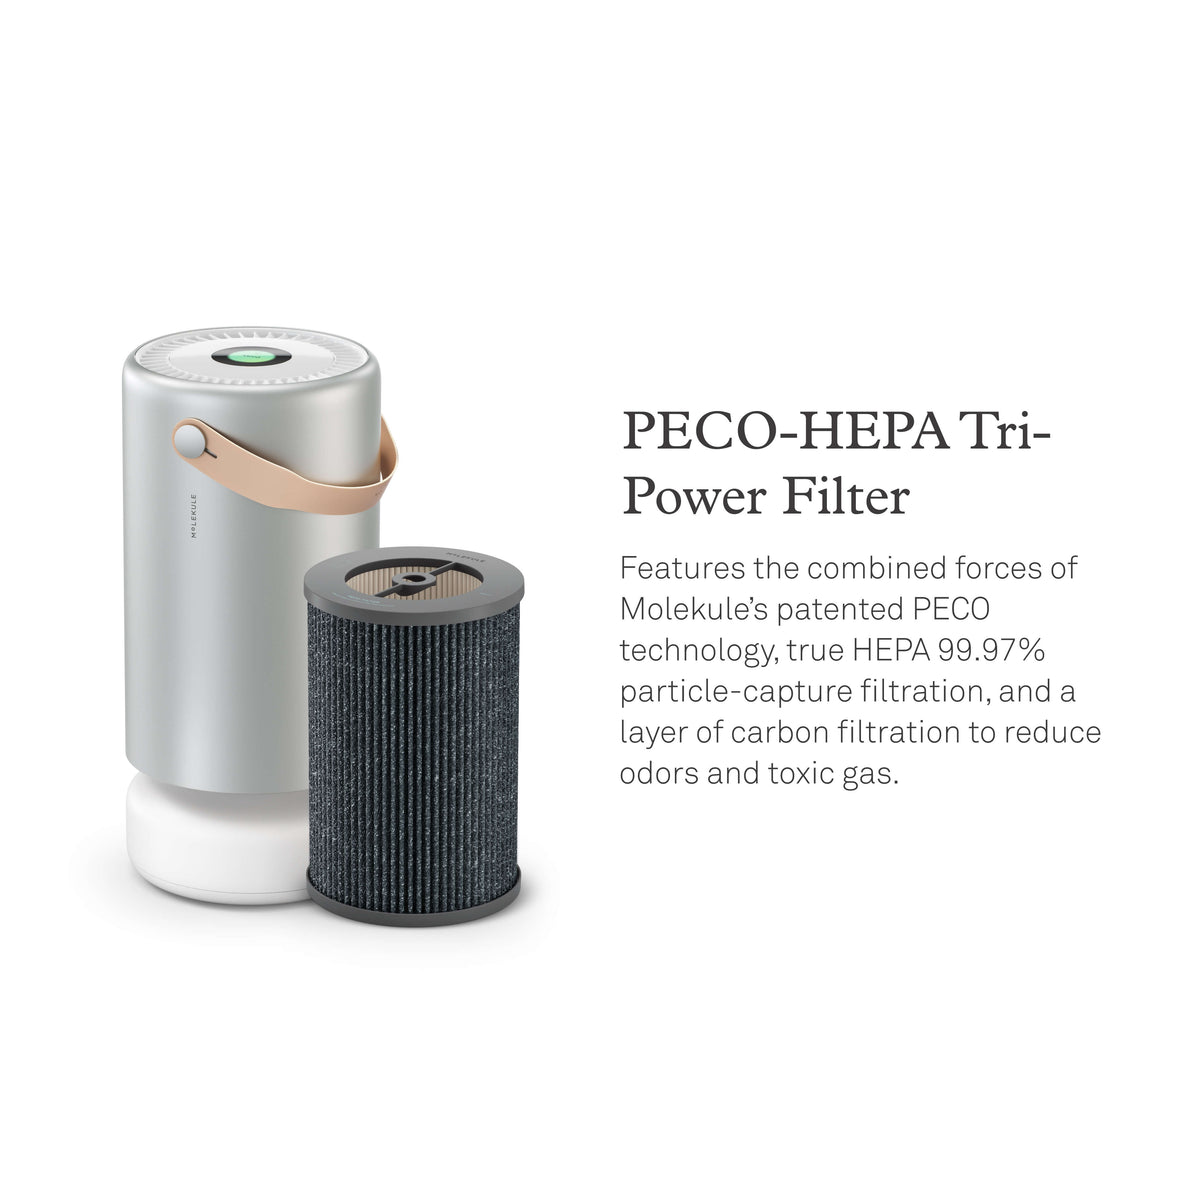 Medi 8 Air Purifier : Breathe Easier with Revolutionary Technology